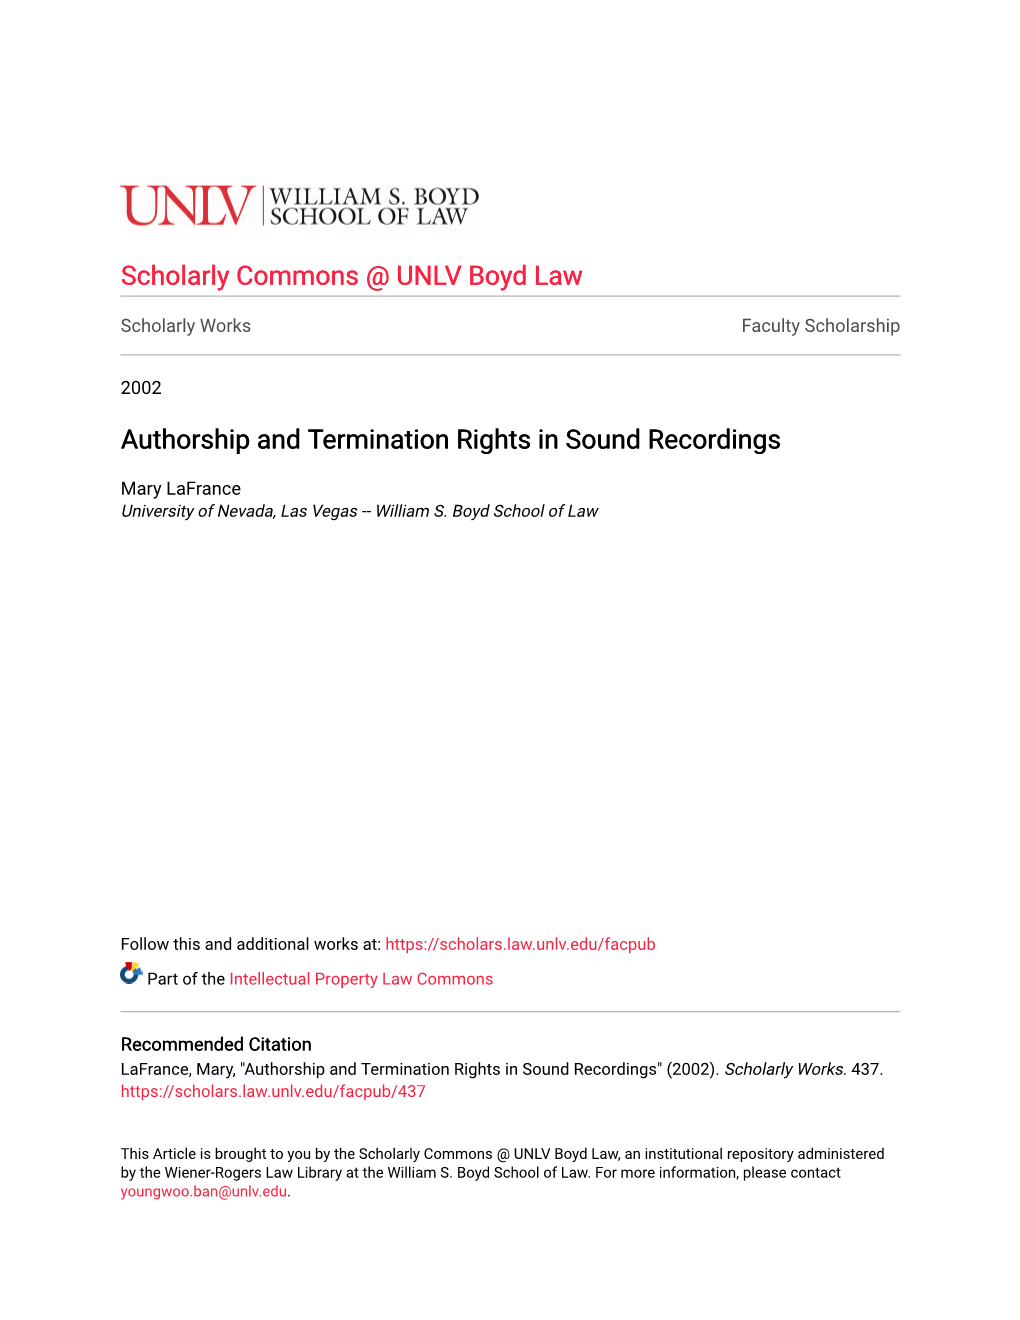 Authorship and Termination Rights in Sound Recordings